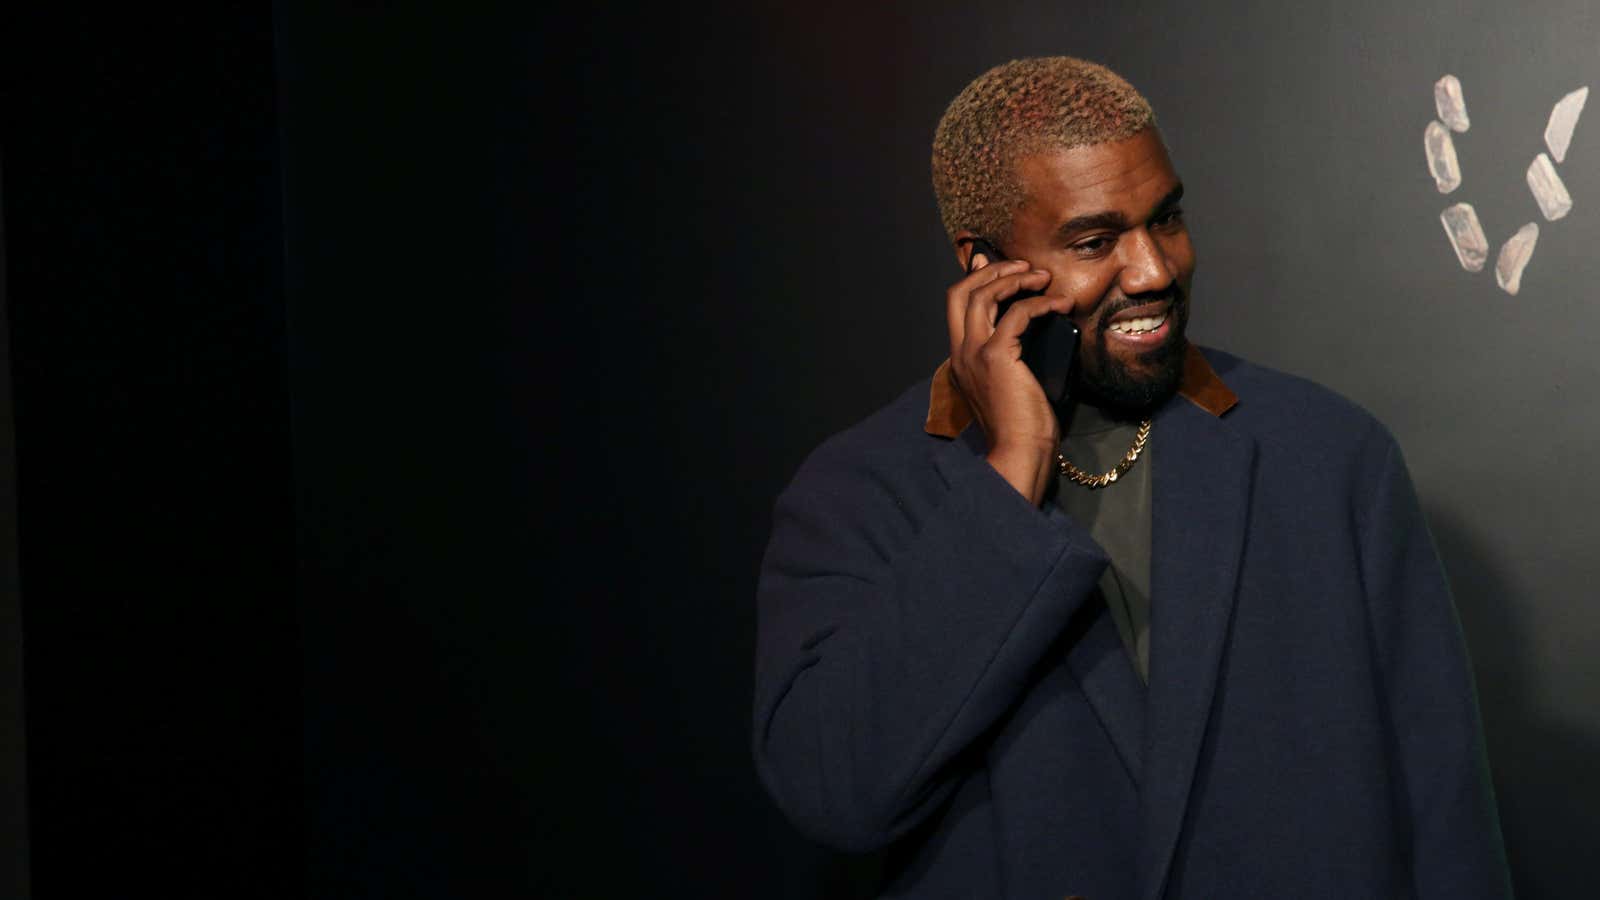 Kanye West has a lot riding on the success of his clothing partnership with Gap.